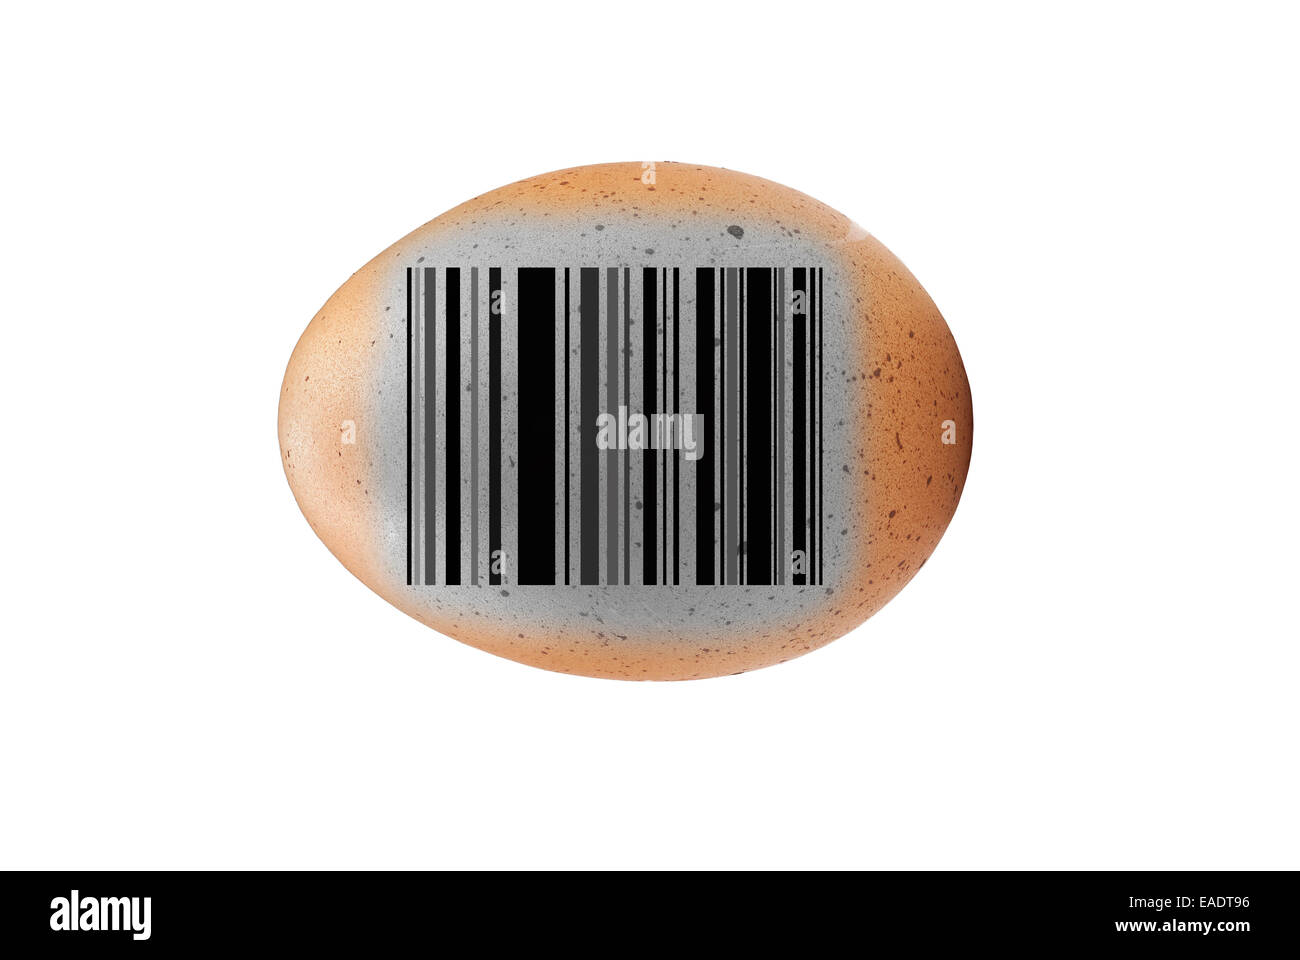 Black and White ,Brown egg on White background Stock Photo